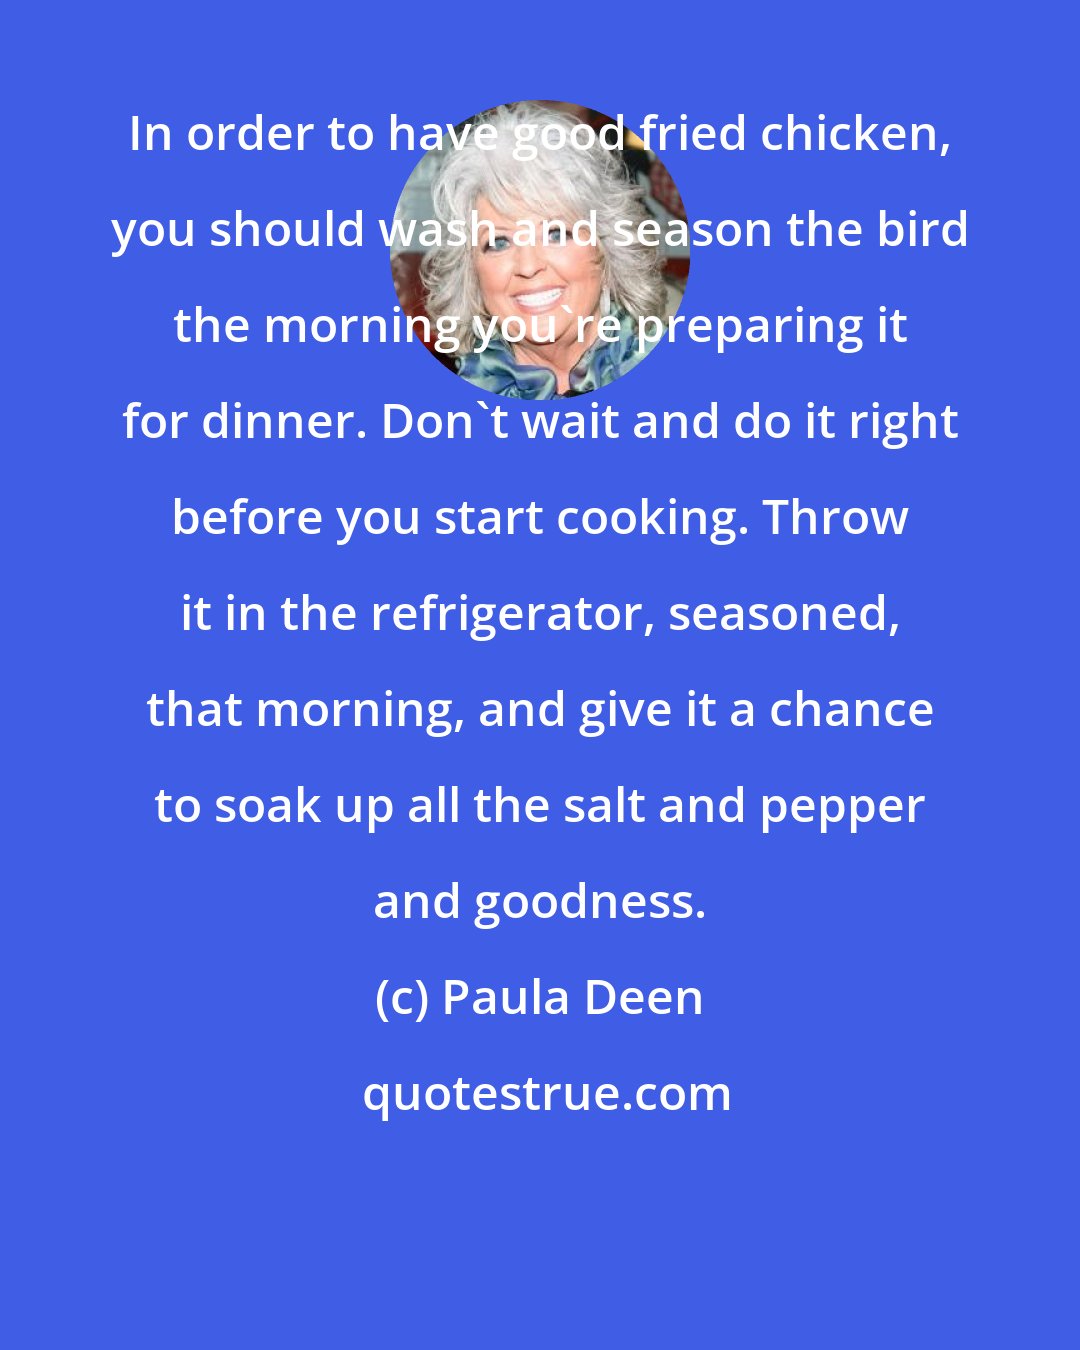 Paula Deen: In order to have good fried chicken, you should wash and season the bird the morning you're preparing it for dinner. Don't wait and do it right before you start cooking. Throw it in the refrigerator, seasoned, that morning, and give it a chance to soak up all the salt and pepper and goodness.